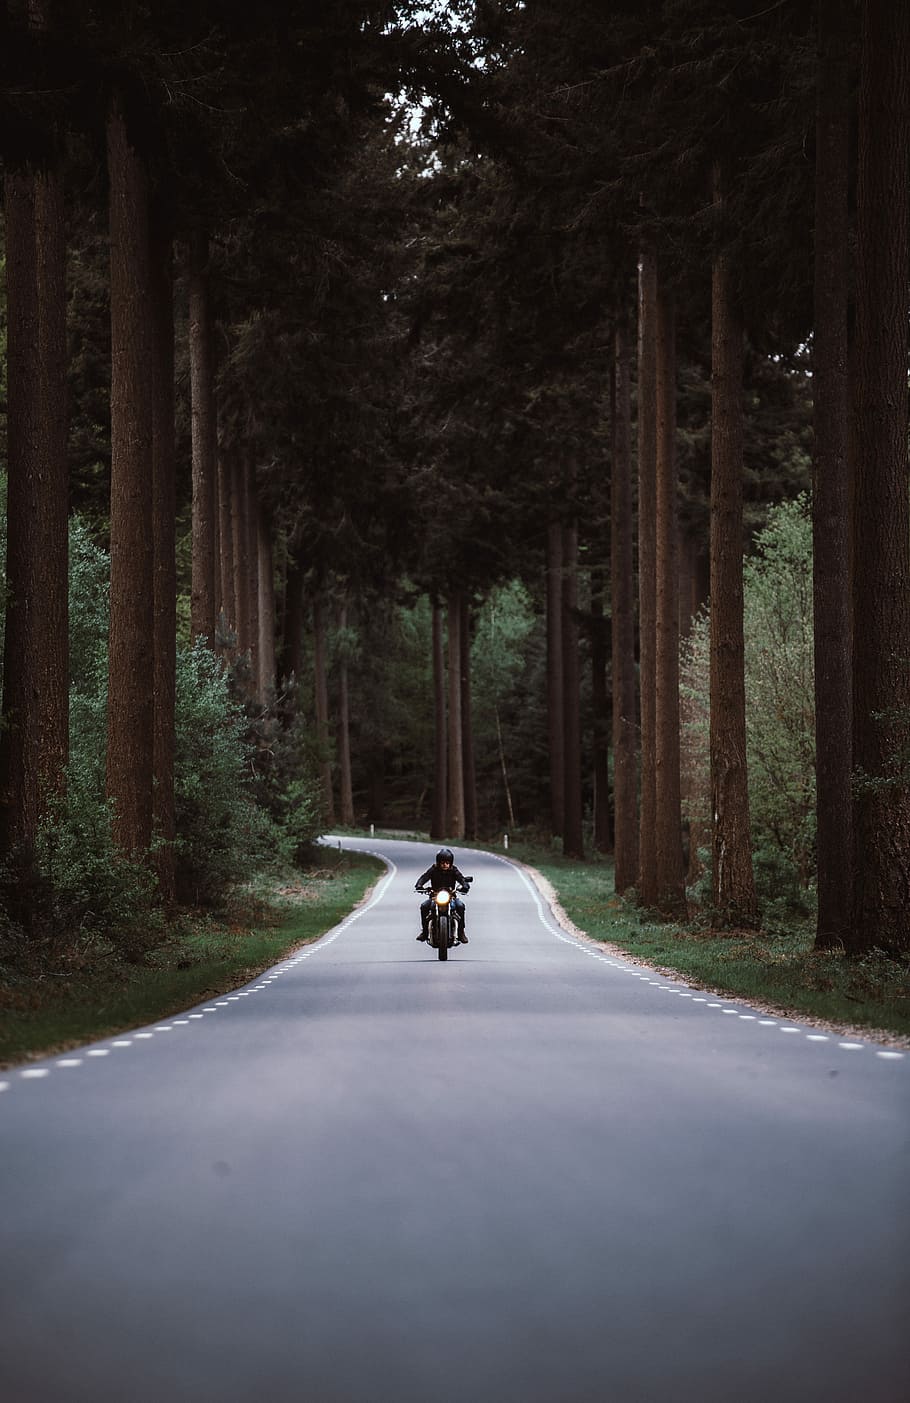 man riding black motorcycle on road between forest, person riding a motorcycle while traveling on gray asphalt road in the middle of trees